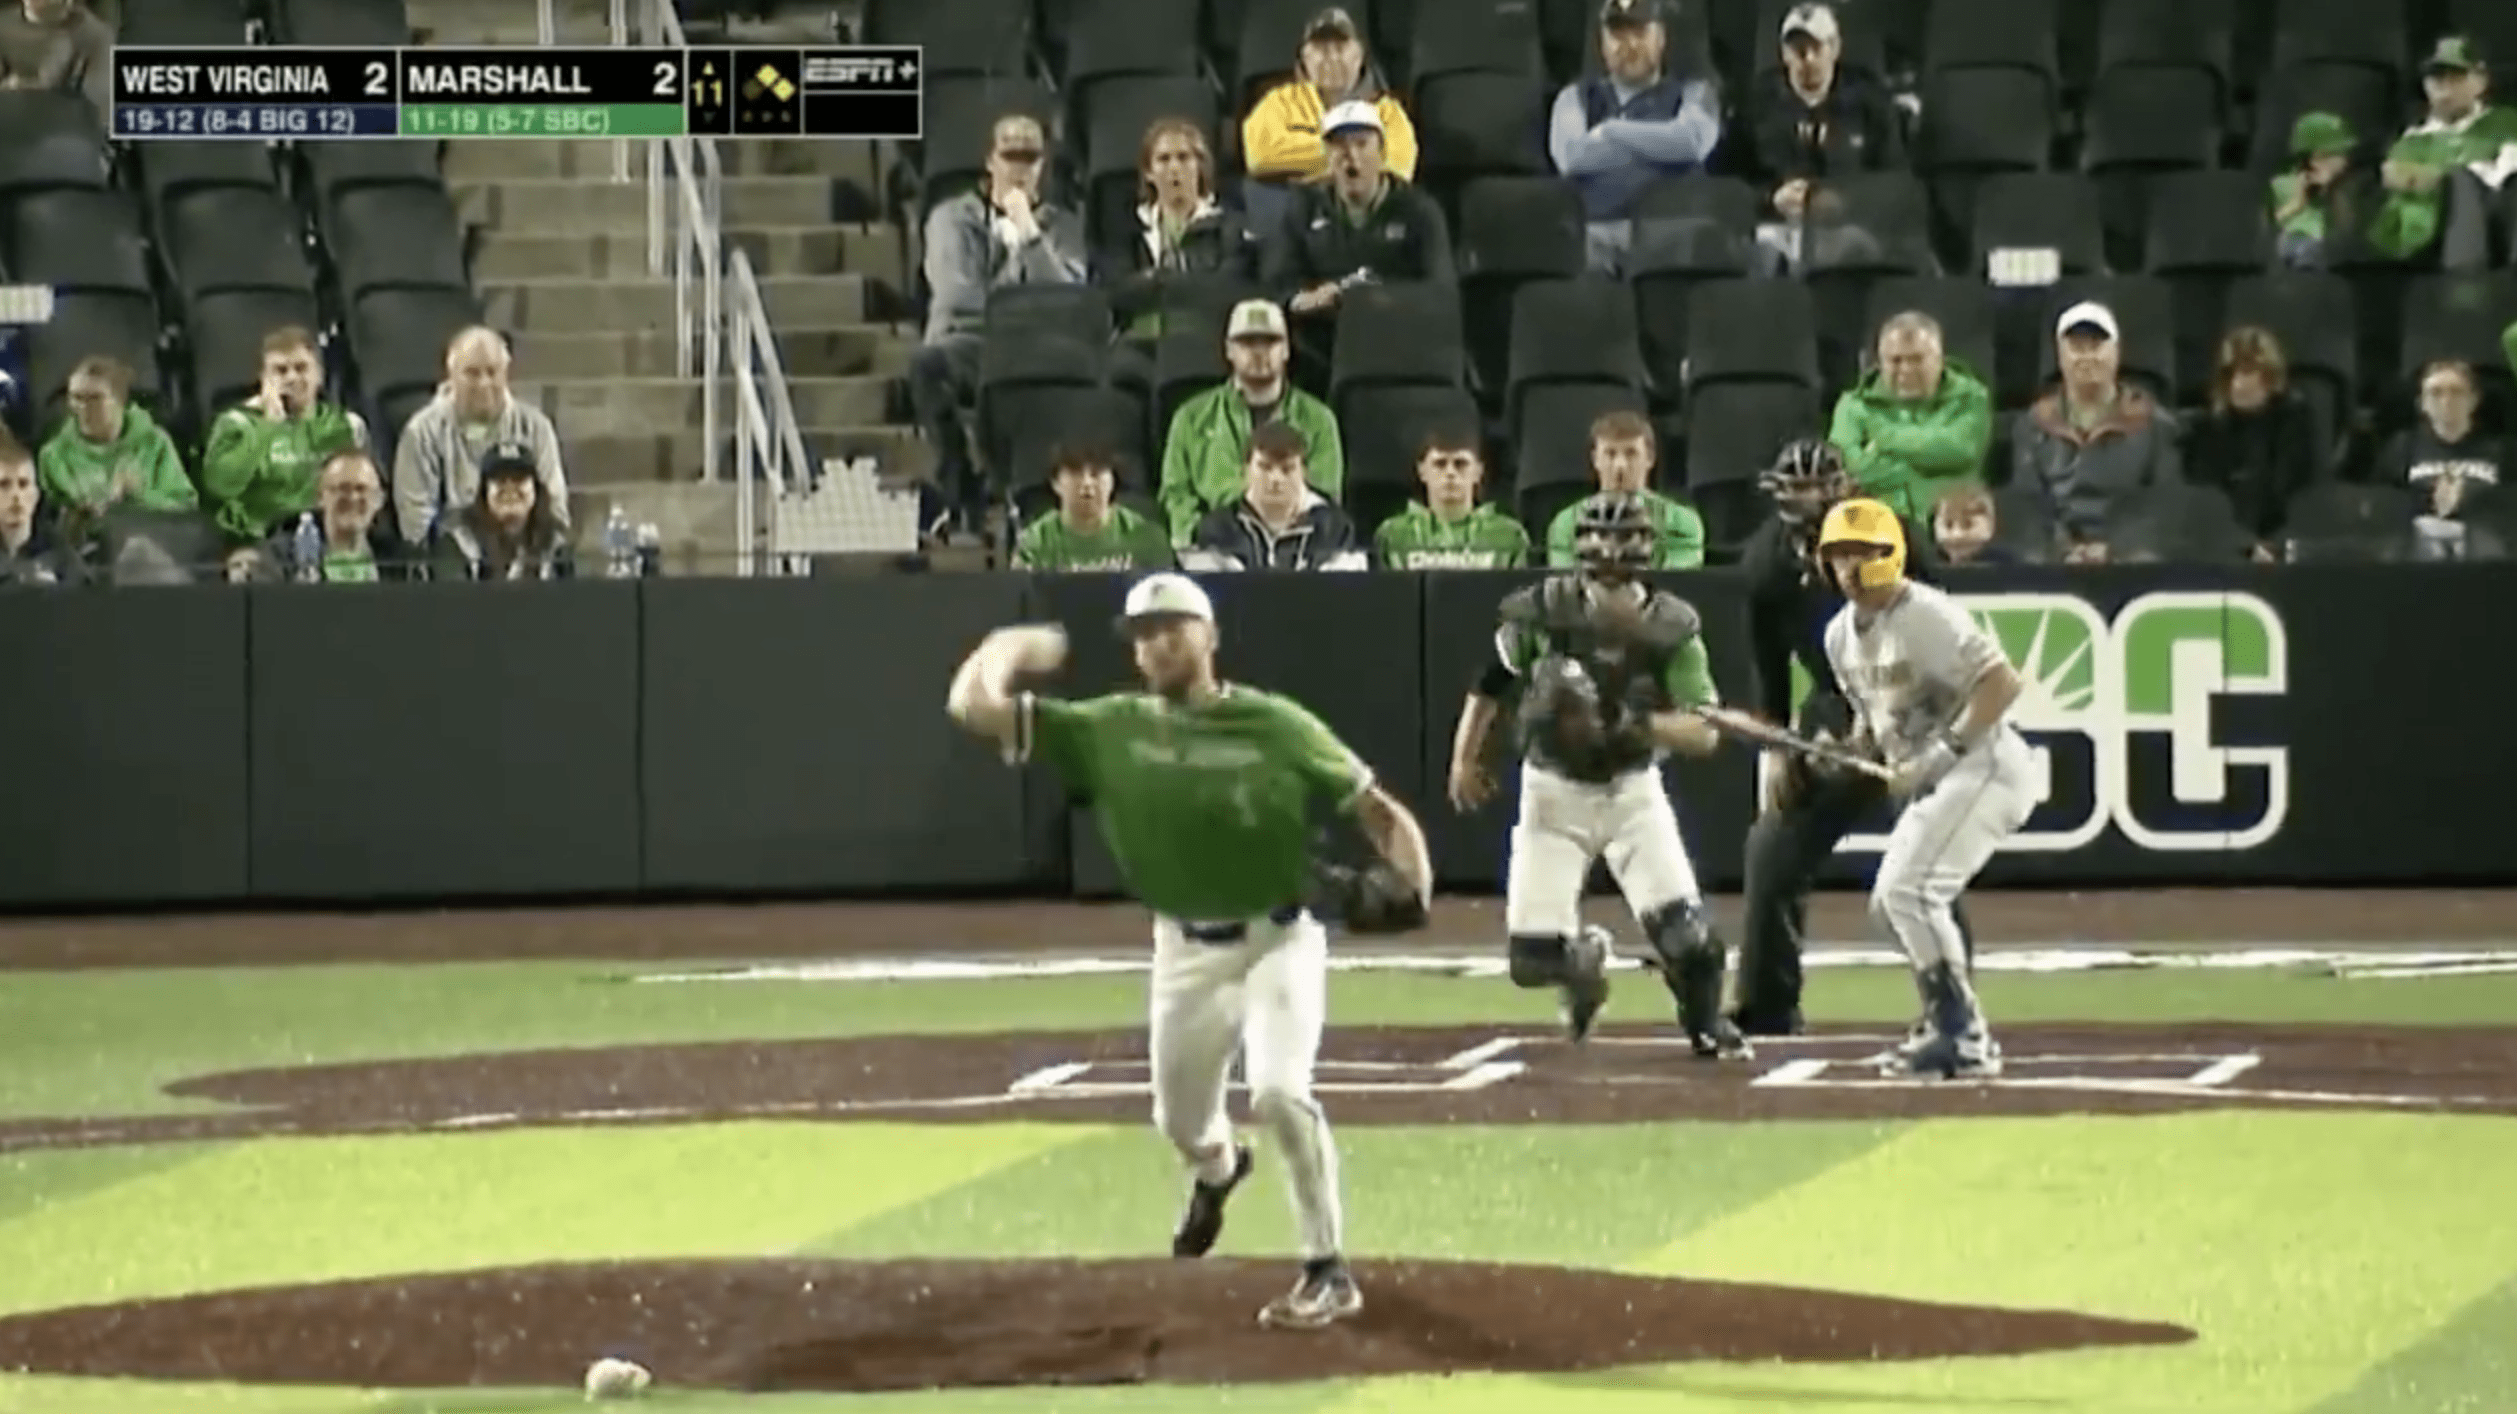 Screenshot from video of Marshall pitcher picking off runner